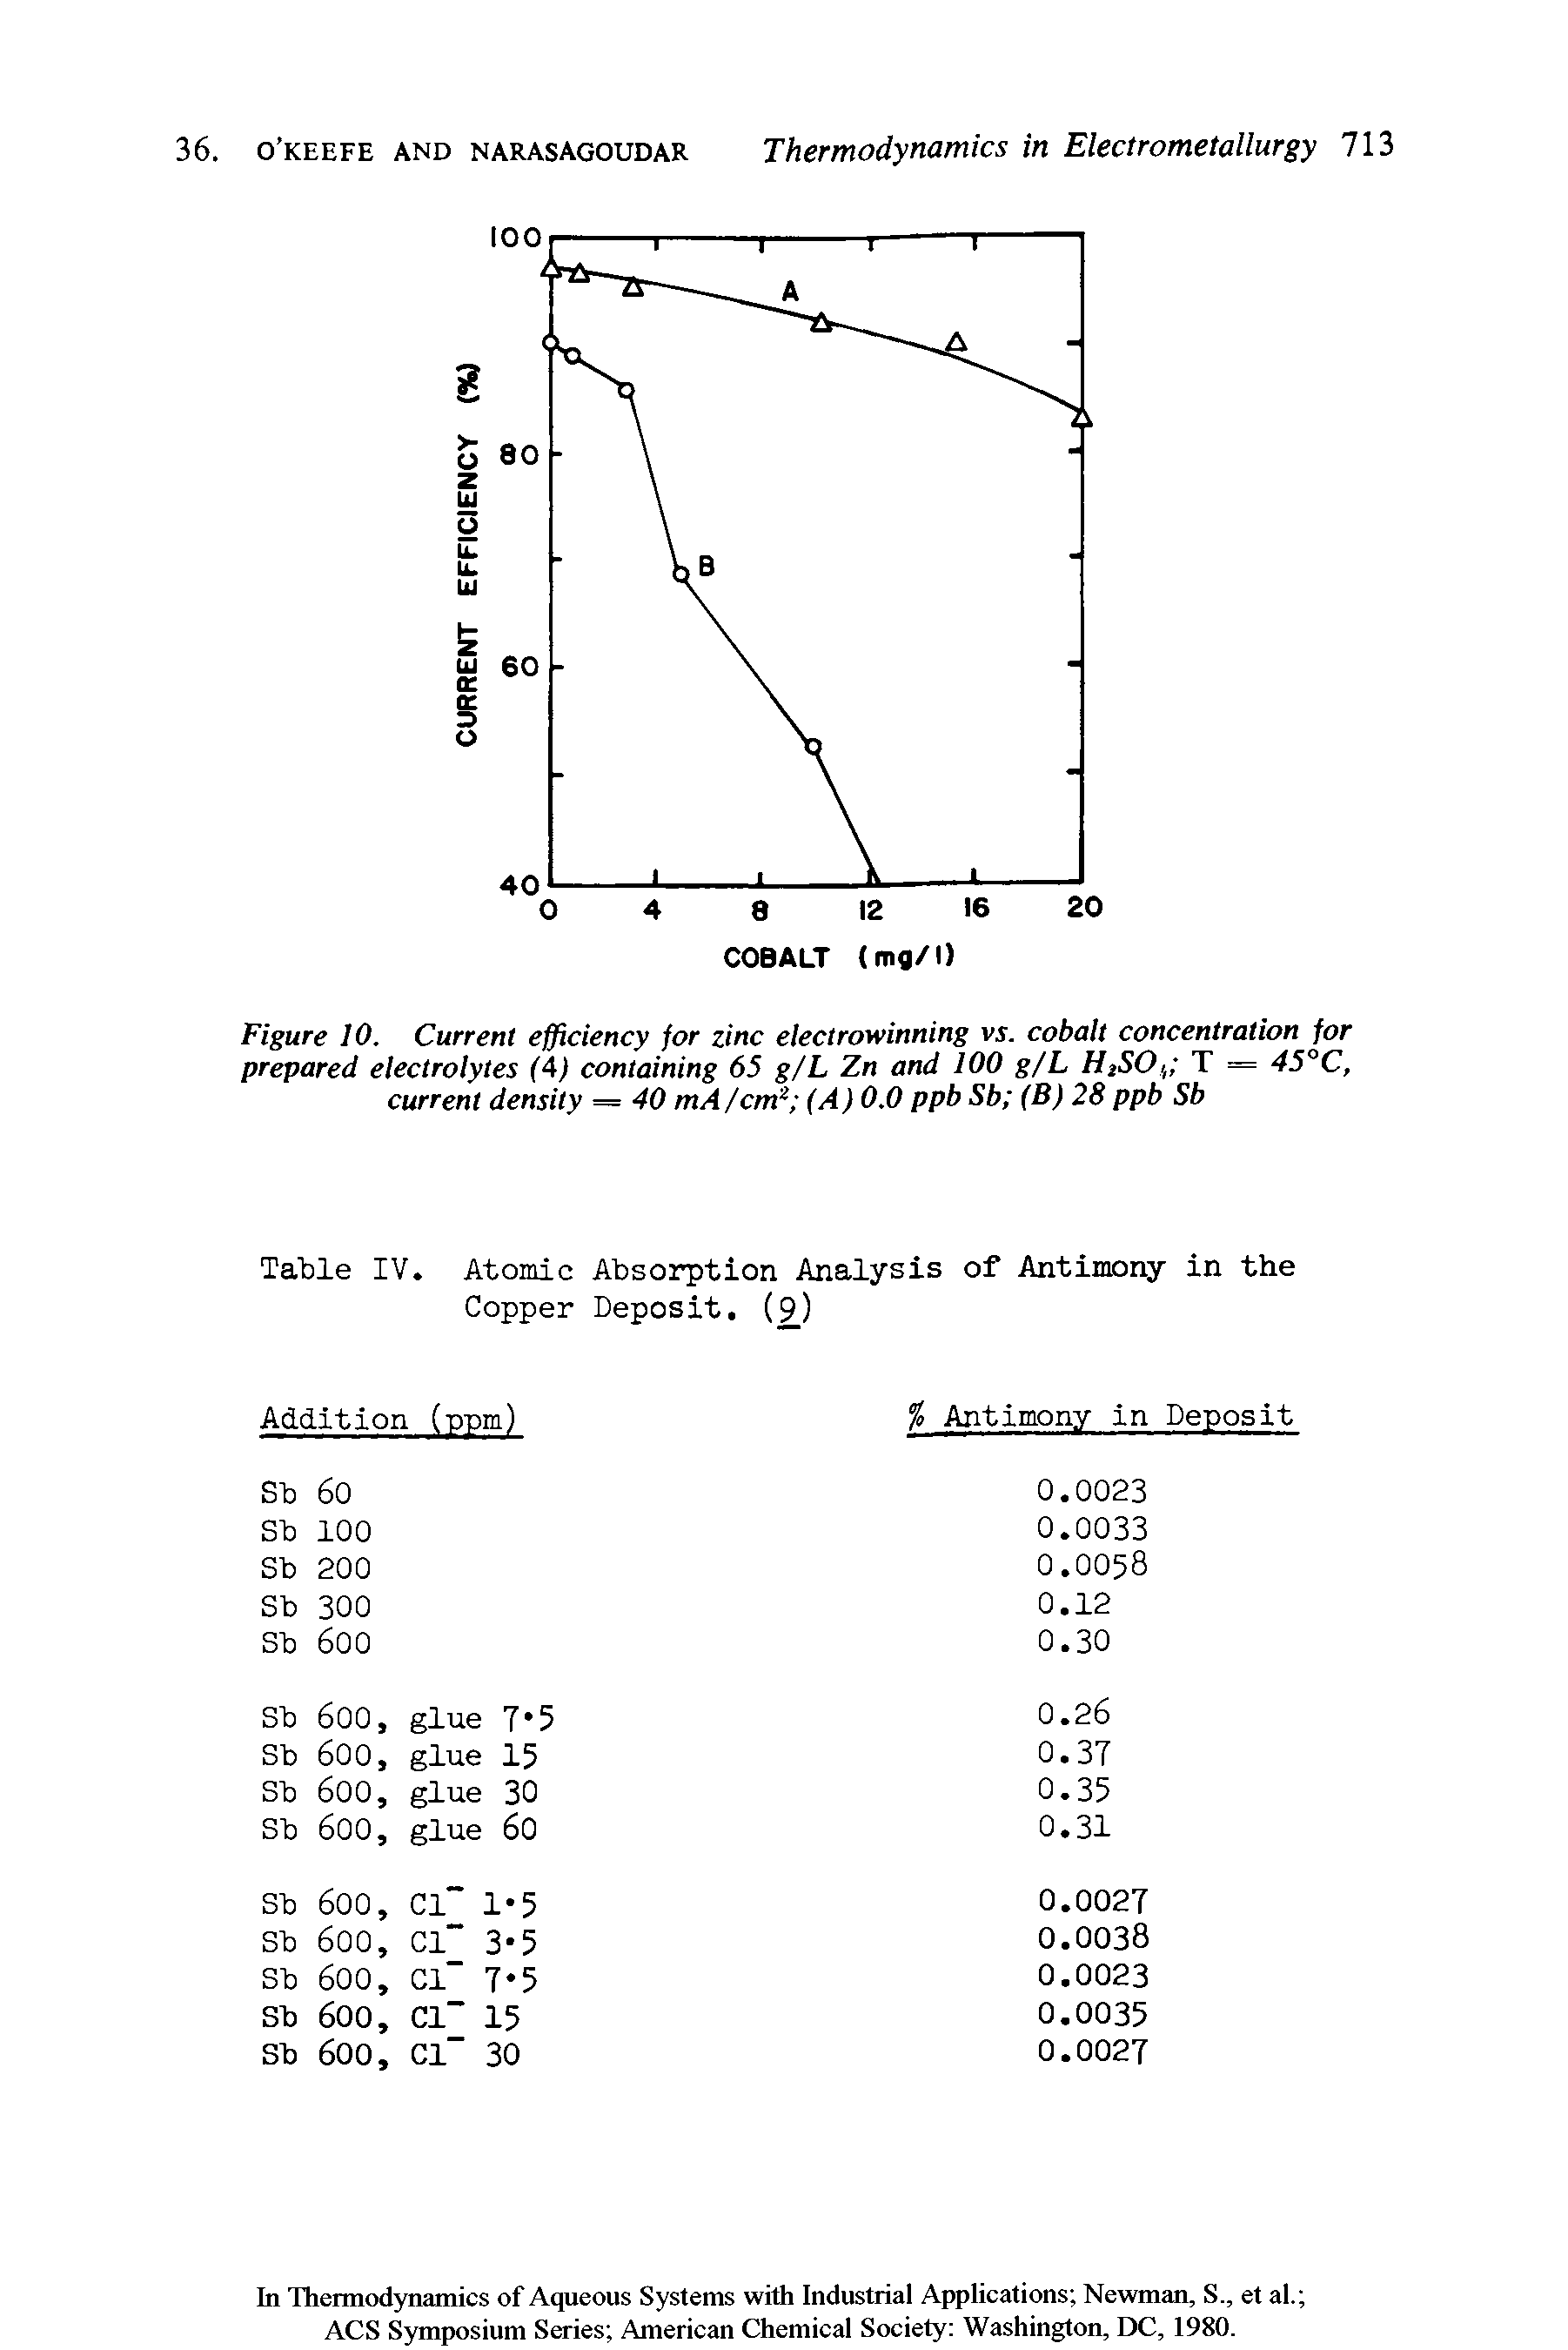 Figure 10. Current efficiency for zinc electrowinning vs. cobalt concentration for prepared electrolytes (4) containing 65 g/L Zn and 100 g/L H1SOi T = 45°C, current density = 40 mA/cm2 (A) 0.0 ppb Sb (B) 28 ppb Sb...